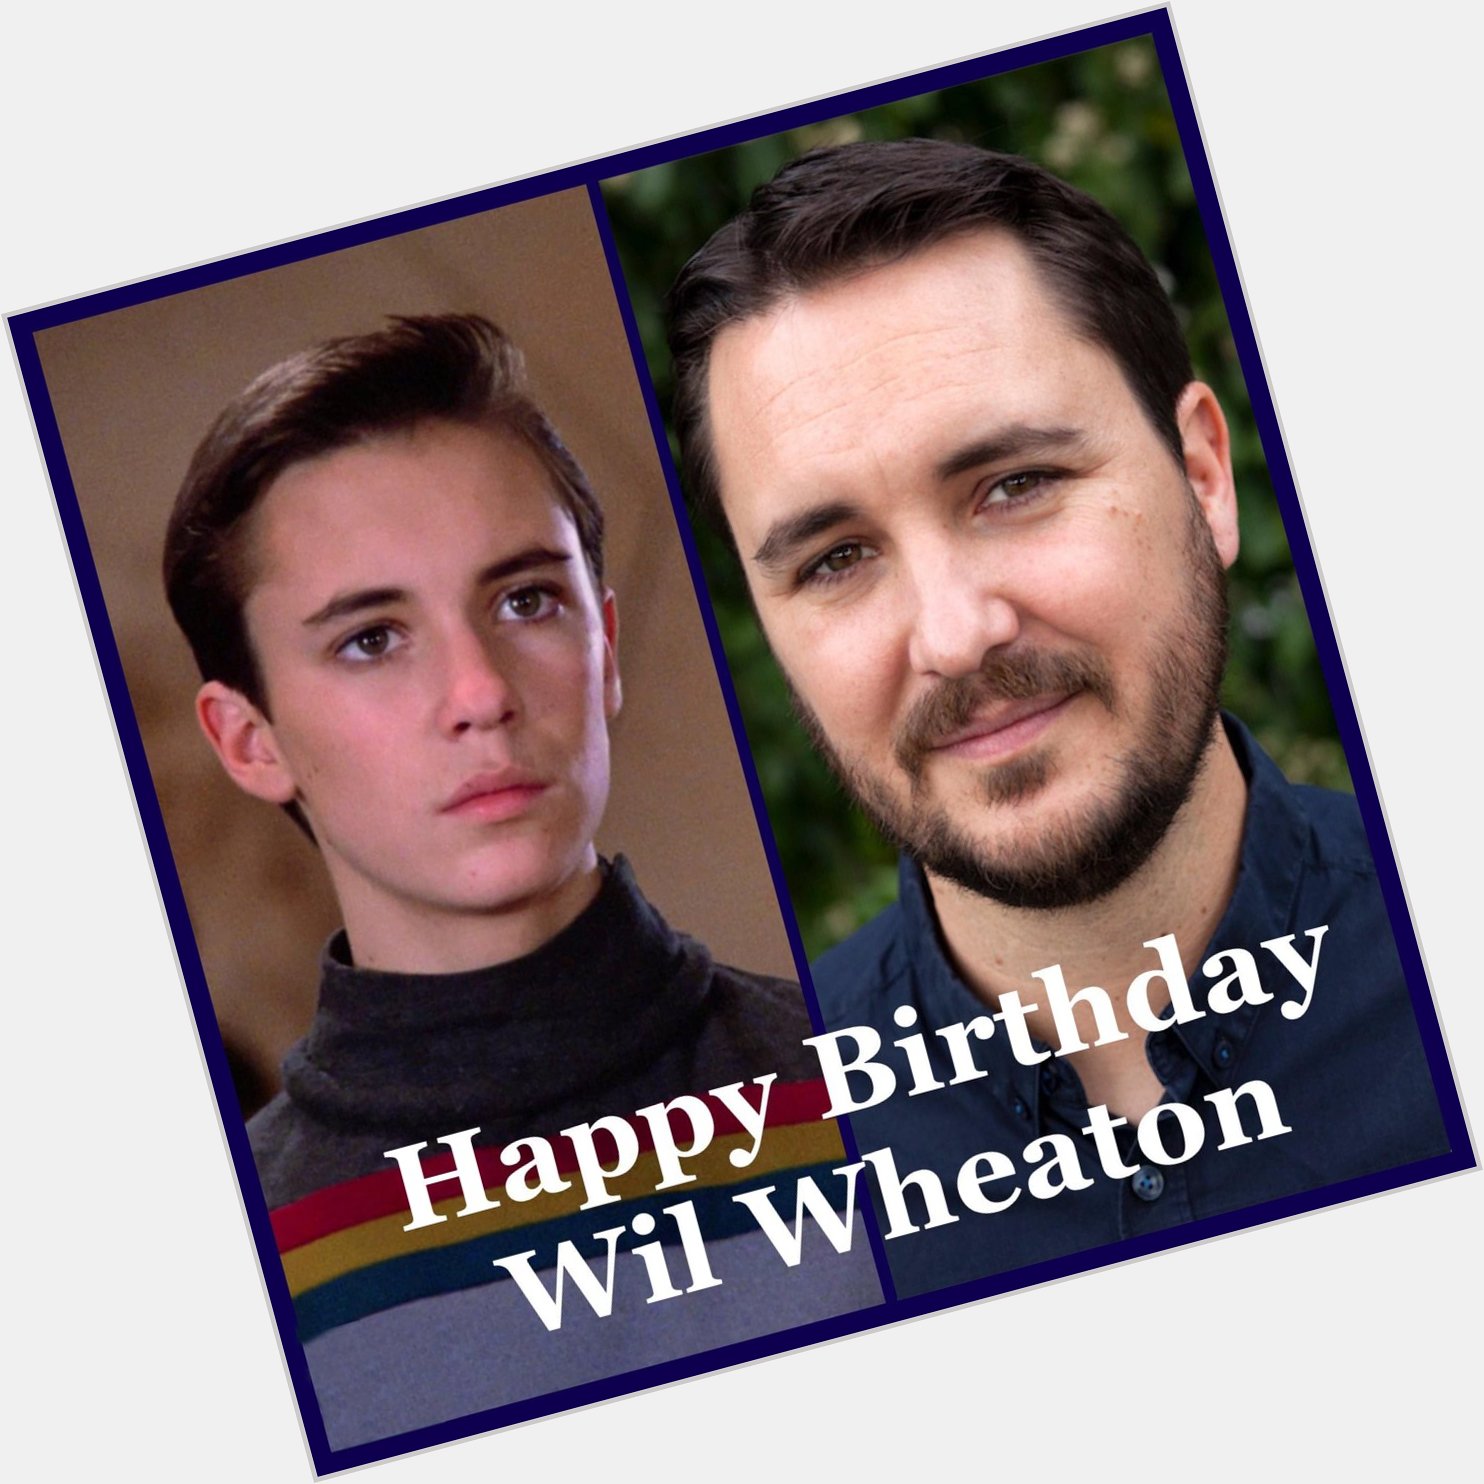 Happy July 29 birthday, Star Trek actor Wil Wheaton... he is already a 50-year-old!! 